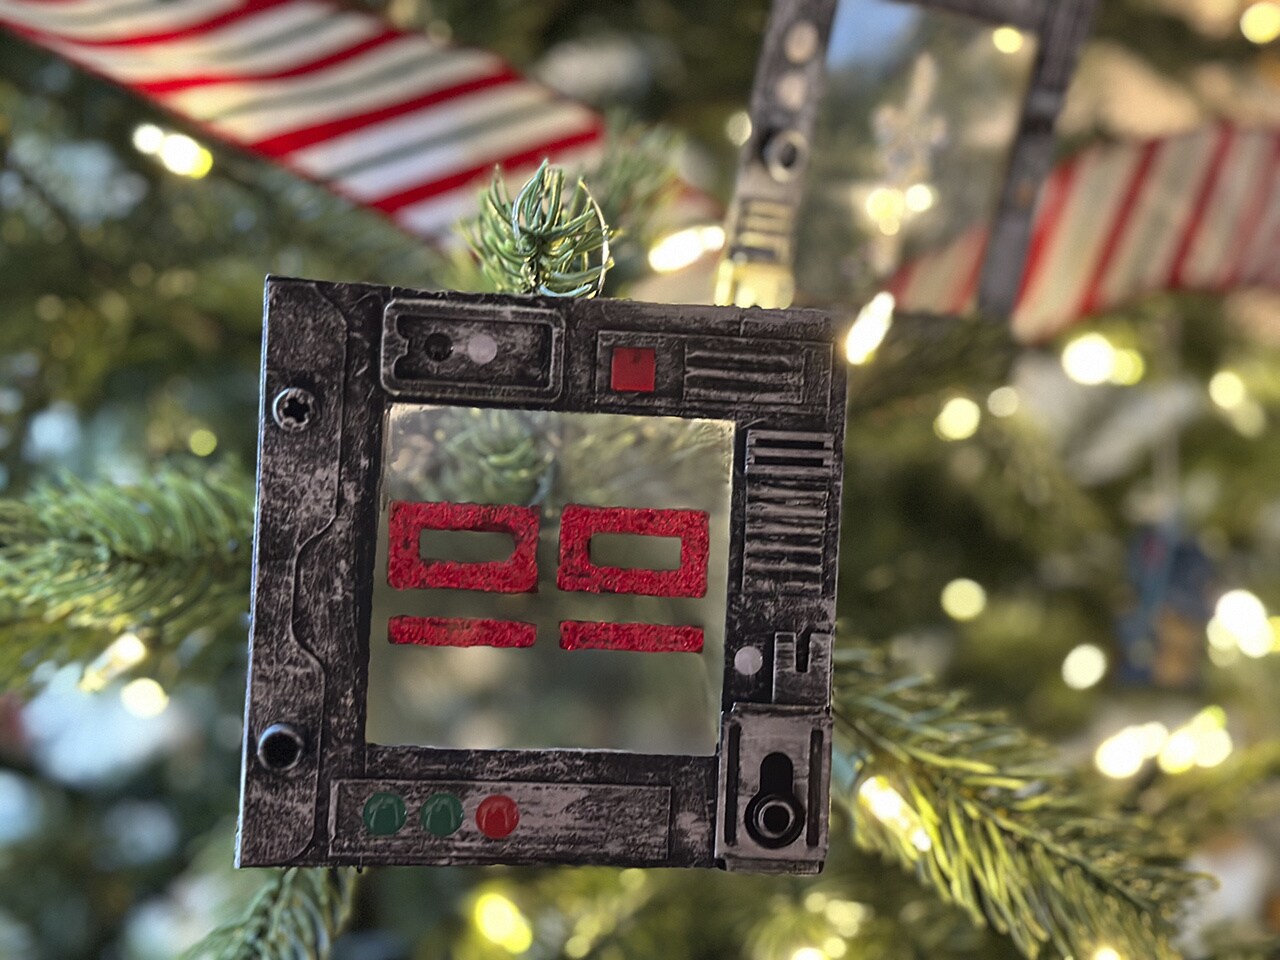 A complete datapad ornament hanging on a tree.